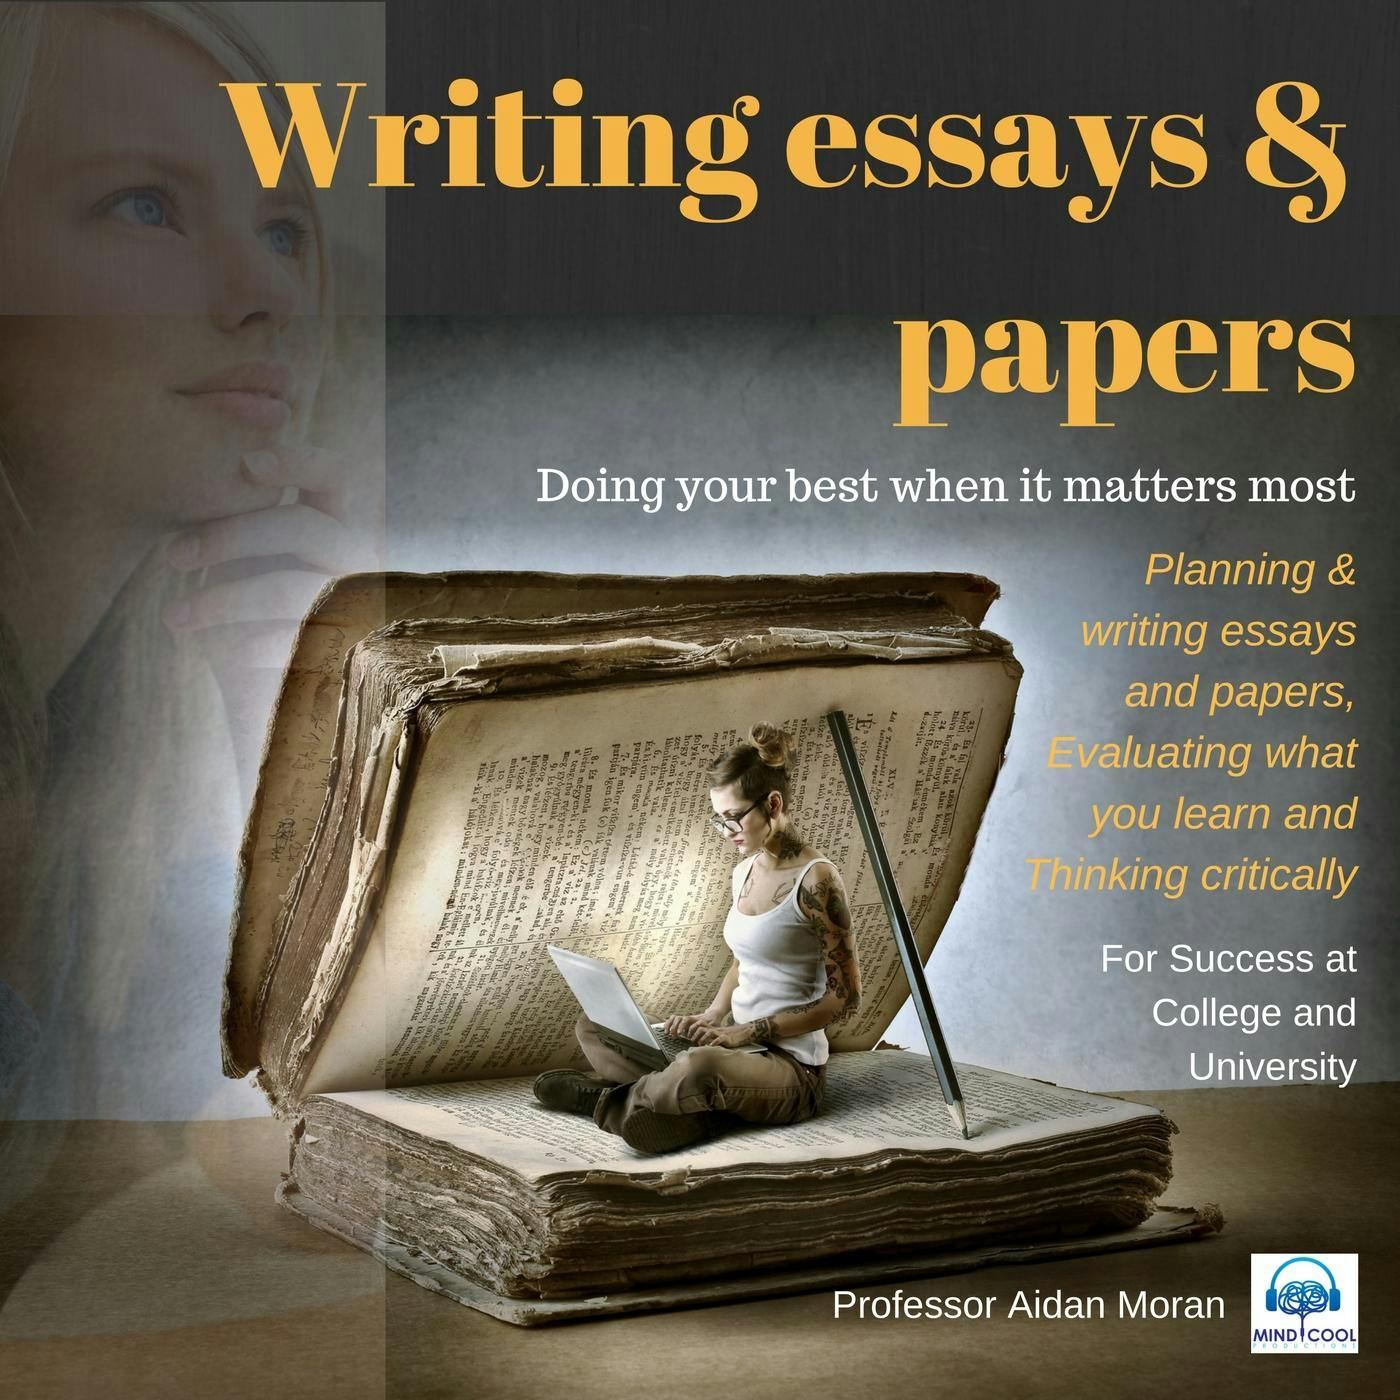 Writing Essays & Papers: Planning & writing essays and papers, evaluating what you learn and thinking critically - Aidan Moran